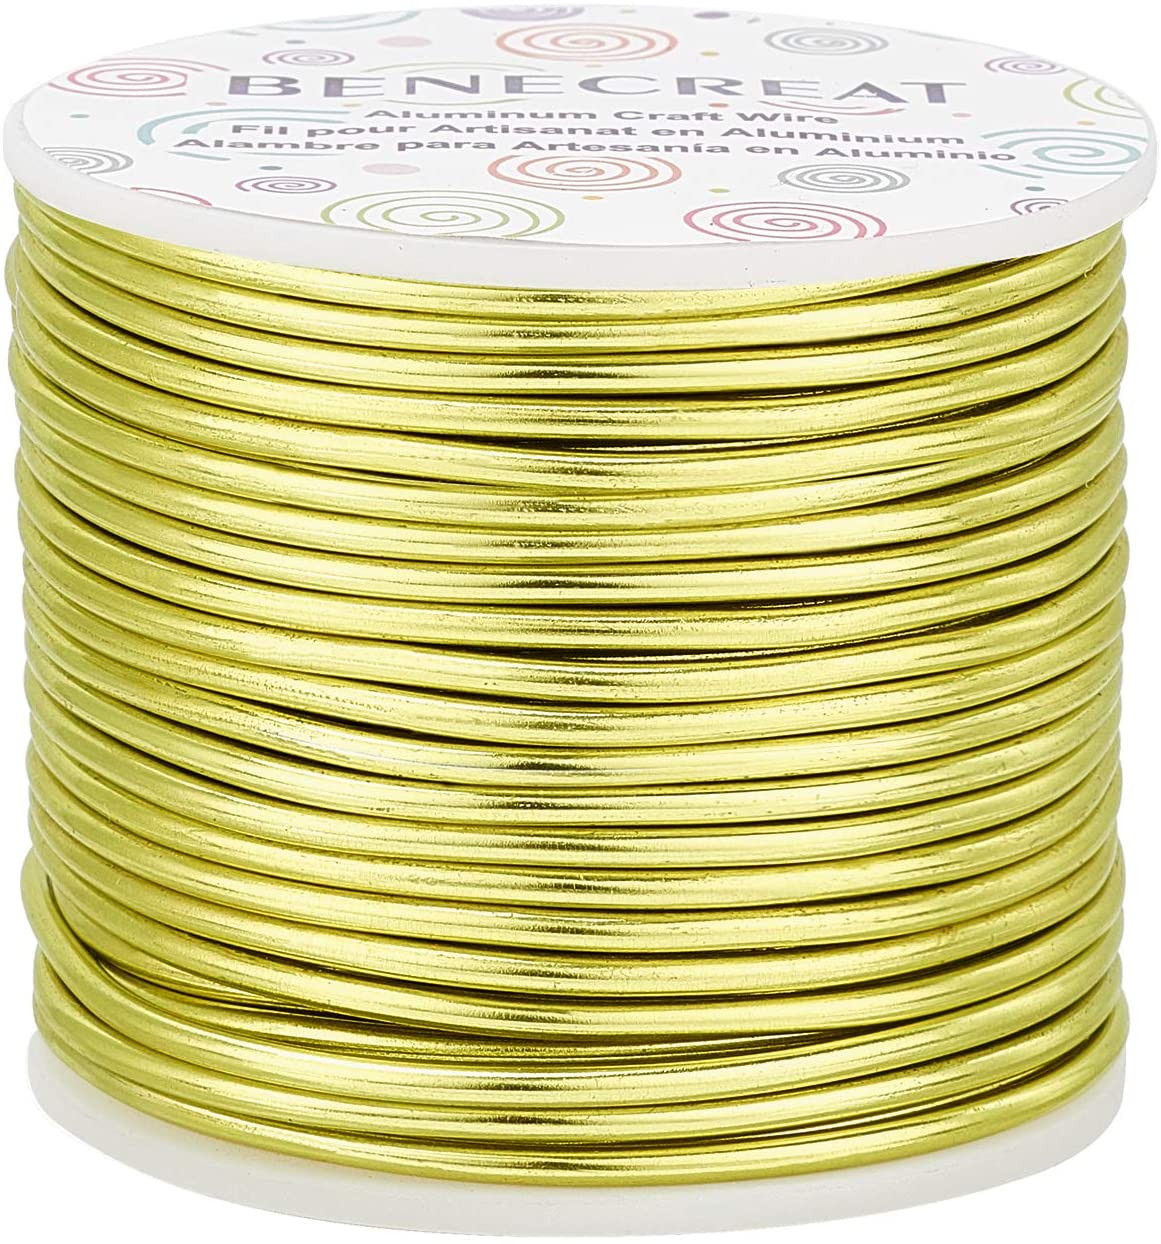 10 Gauge 80FT Tarnish Resistant Jewelry Craft Wire Bendable Aluminum  Sculpting Metal Wire for Jewelry Craft Beading Work YellowGreen